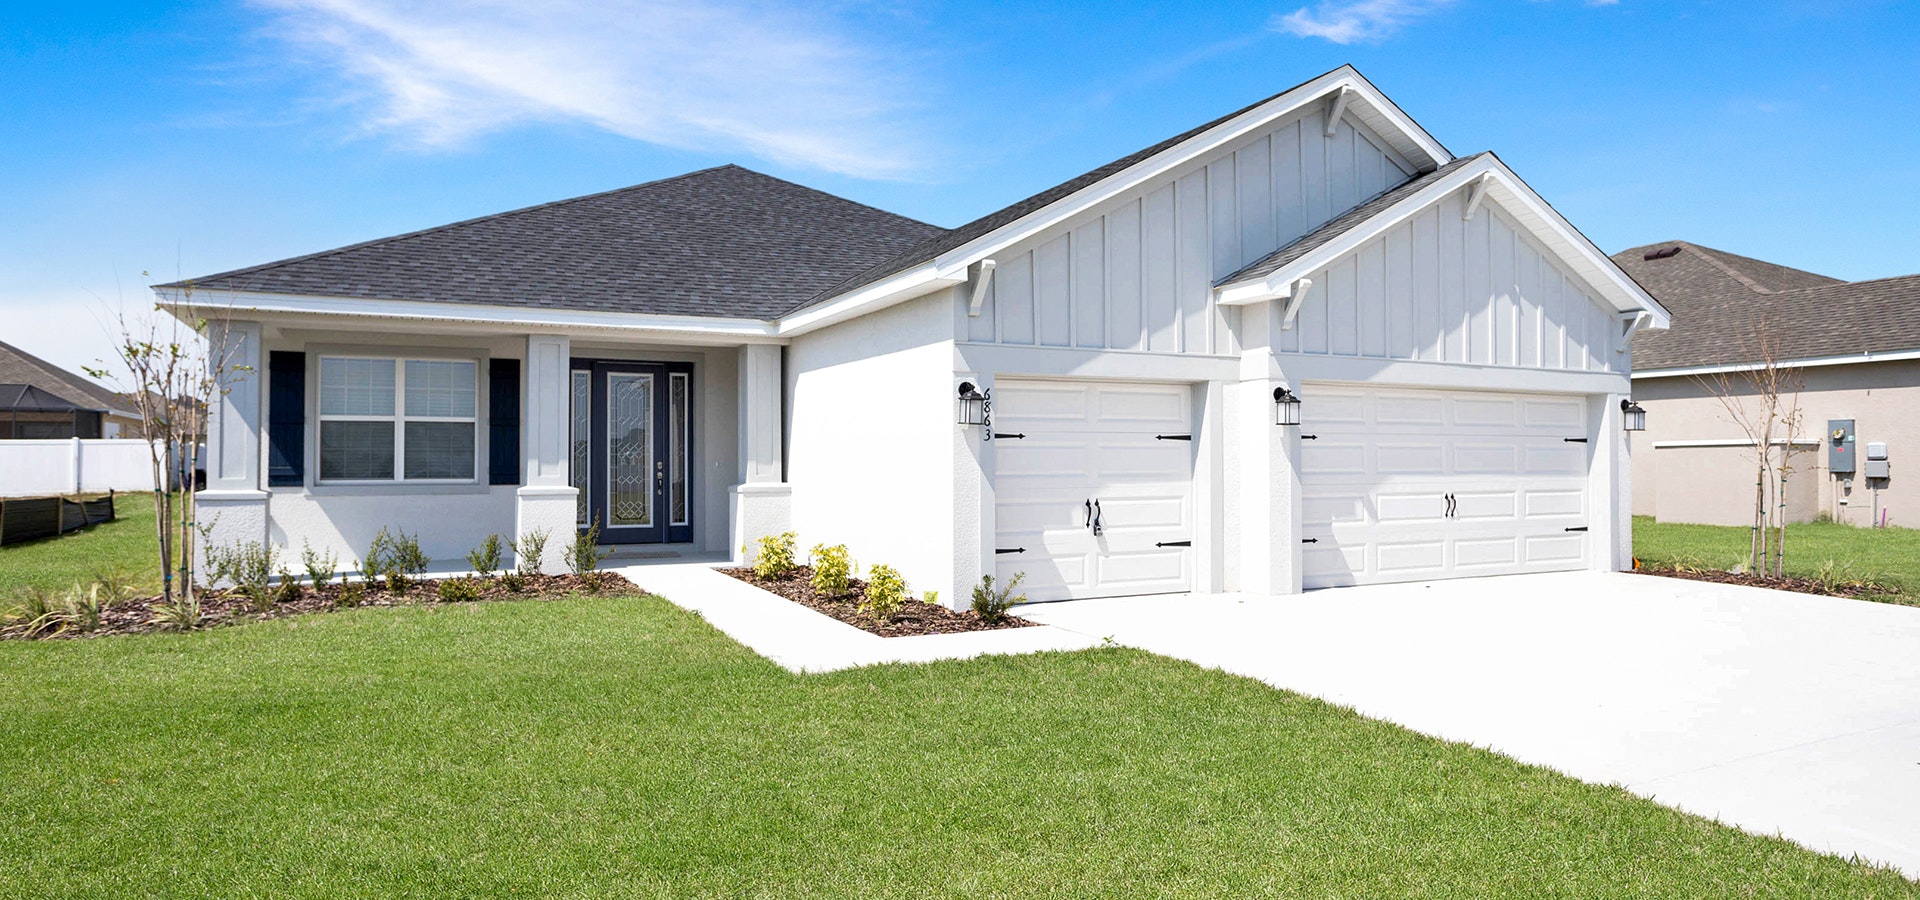 Exterior of a spacious new home in St. Cloud, FL